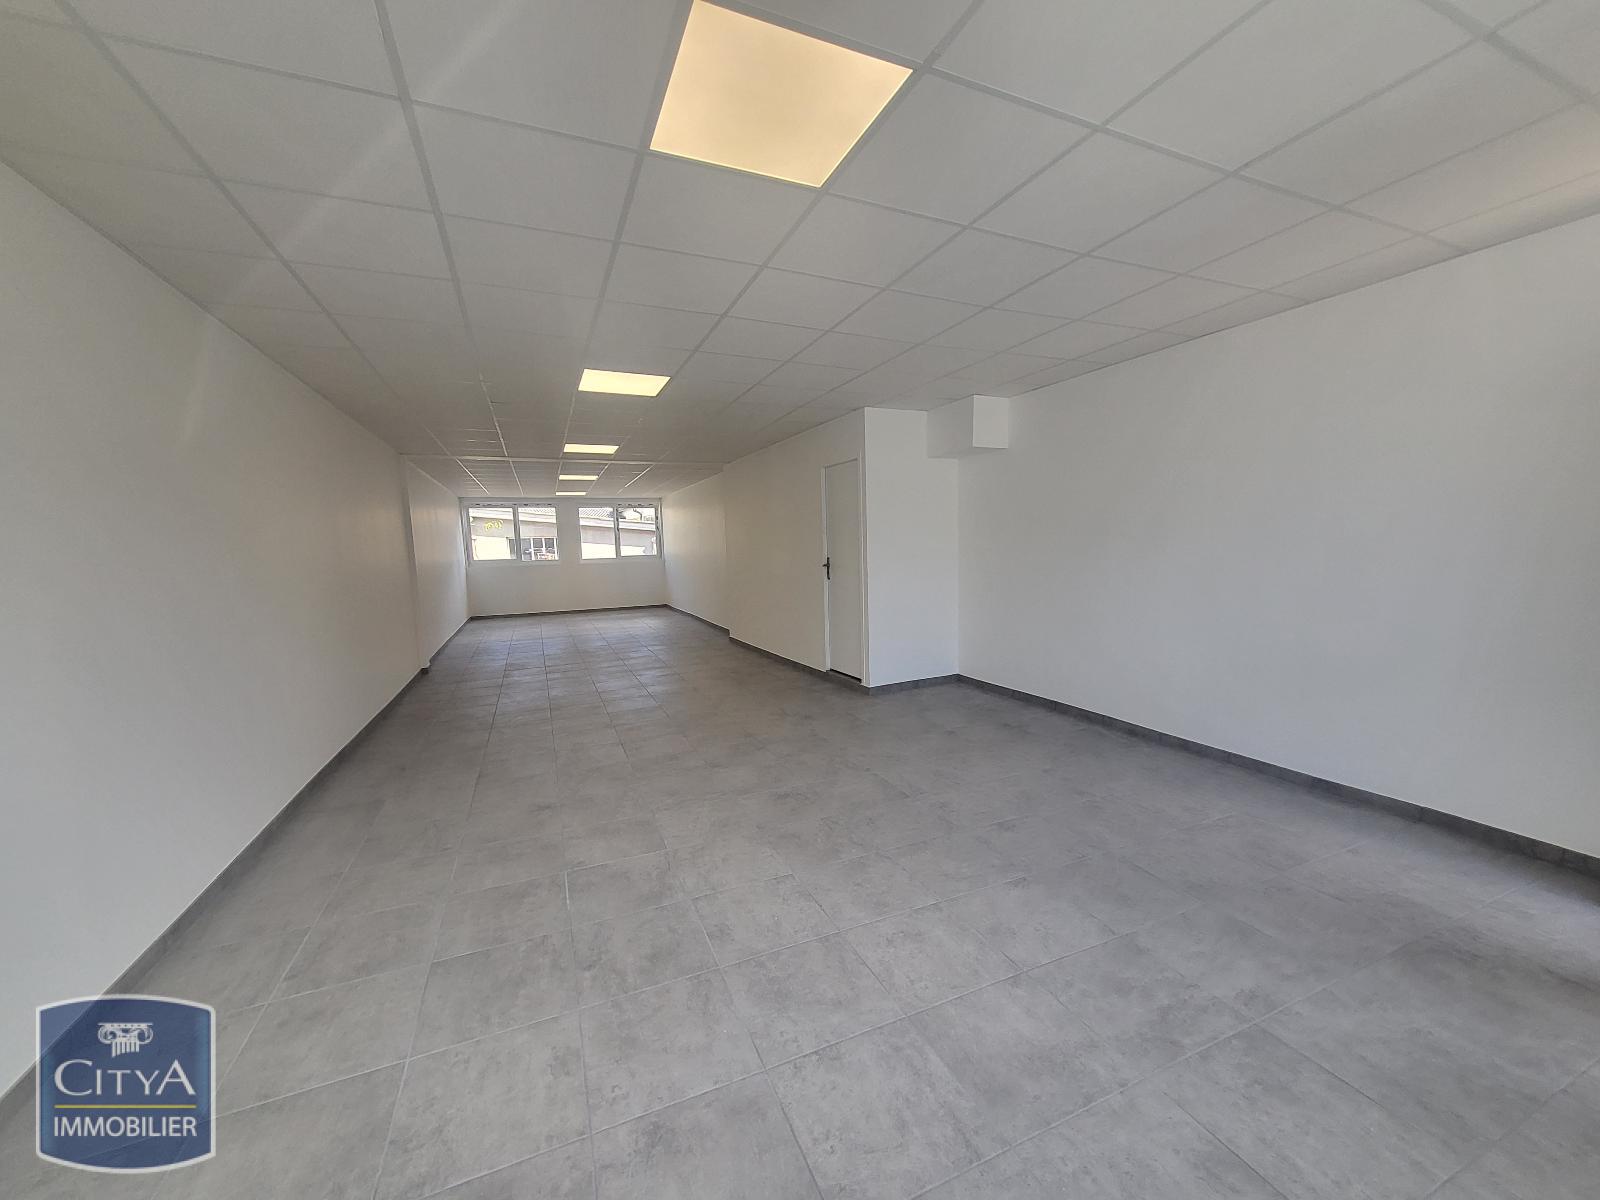 Photo Local Commercial 68.74m²